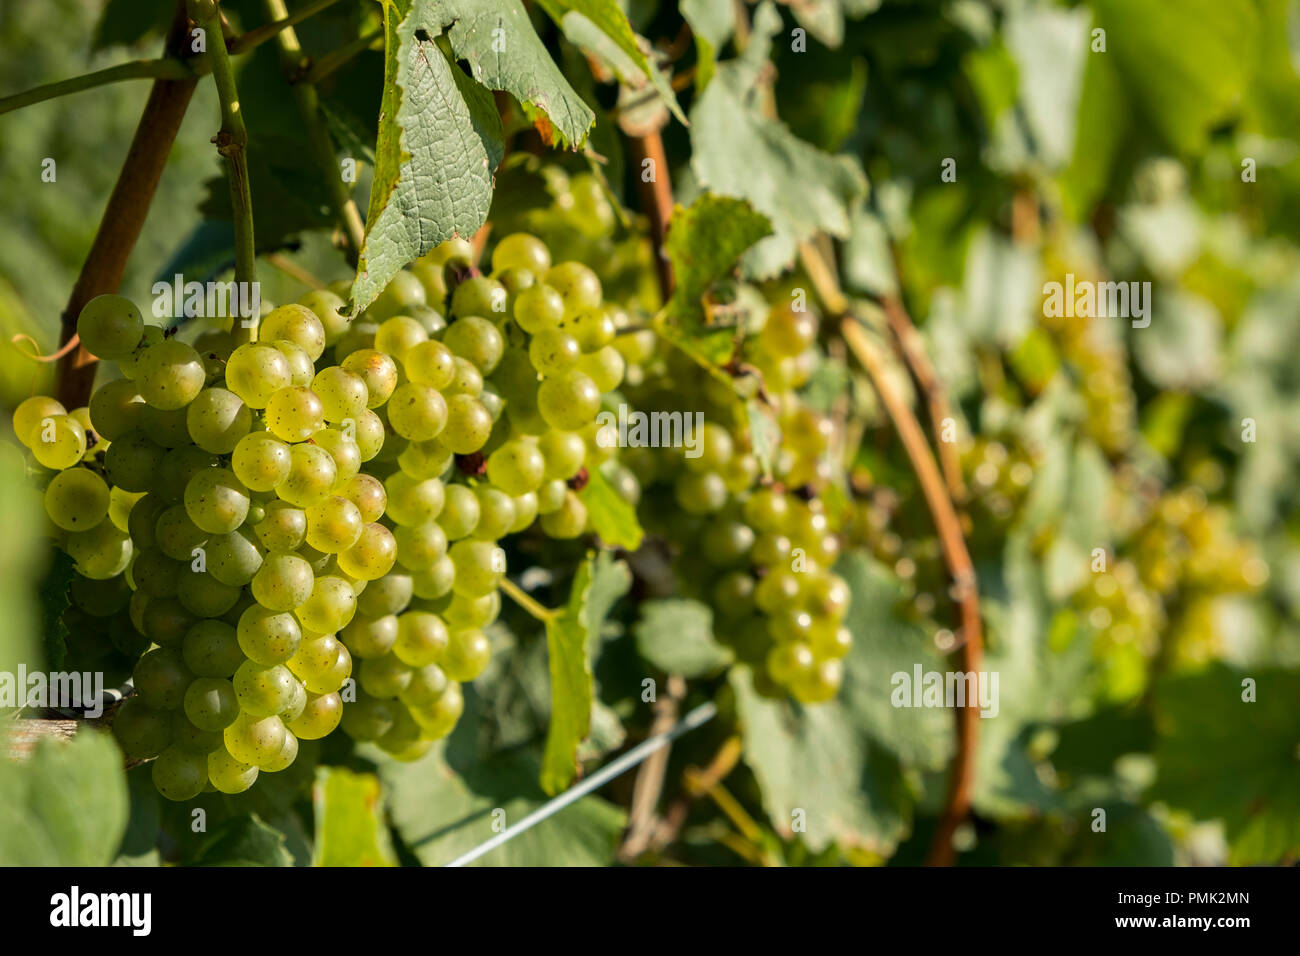 Clusters of green grapes hang on vines in a vineyard in Niagara on the Lake, Ontario, Canada, Stock Photo